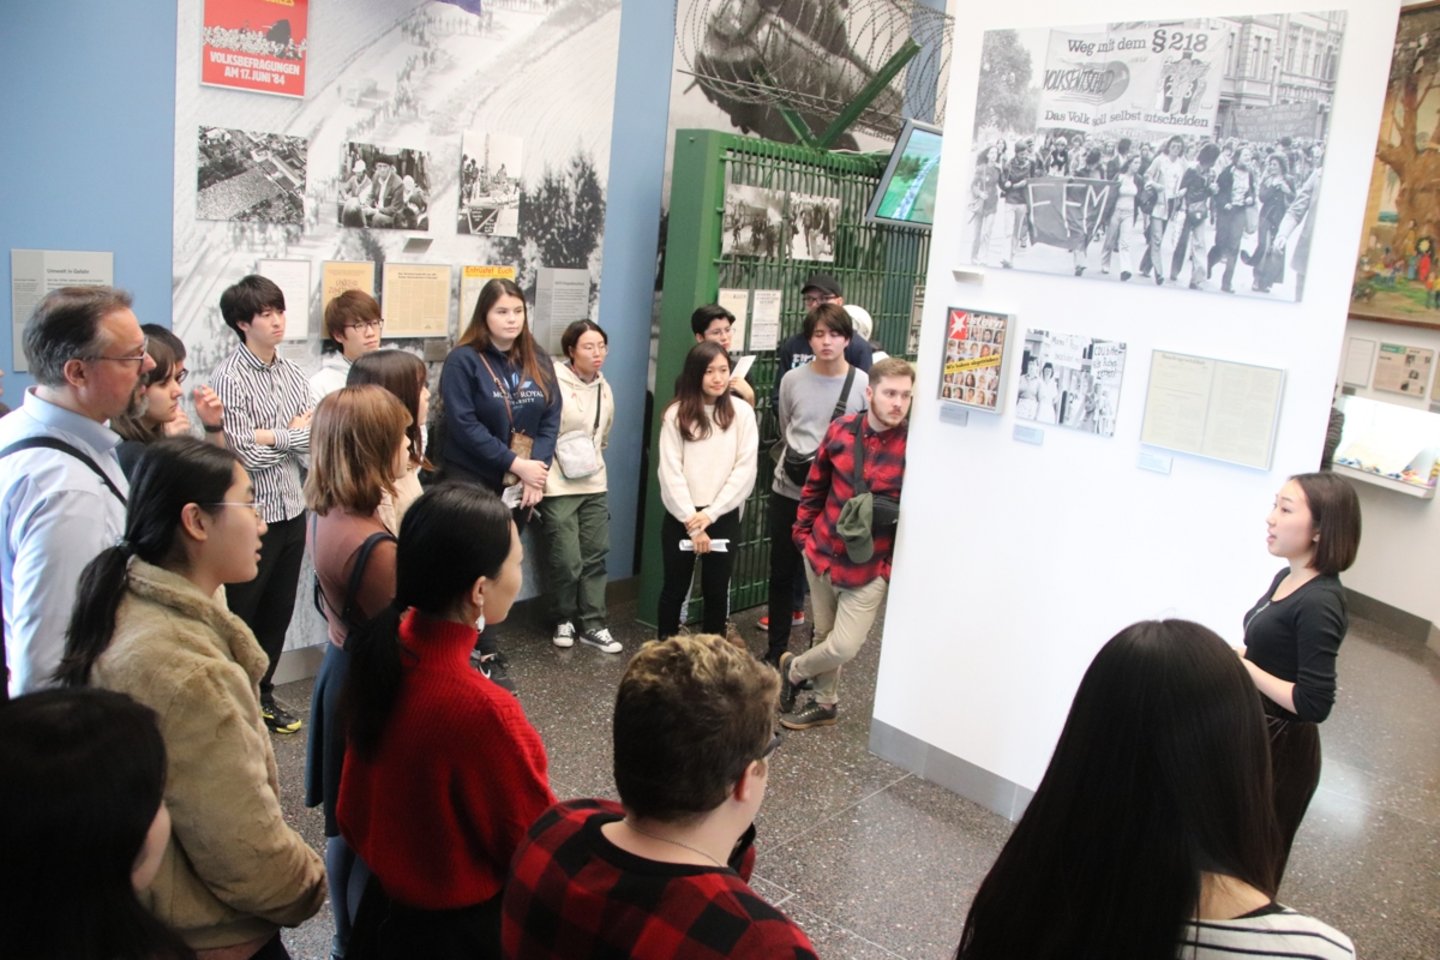 Group of students listening to the guide in the Haus der Geschichte.